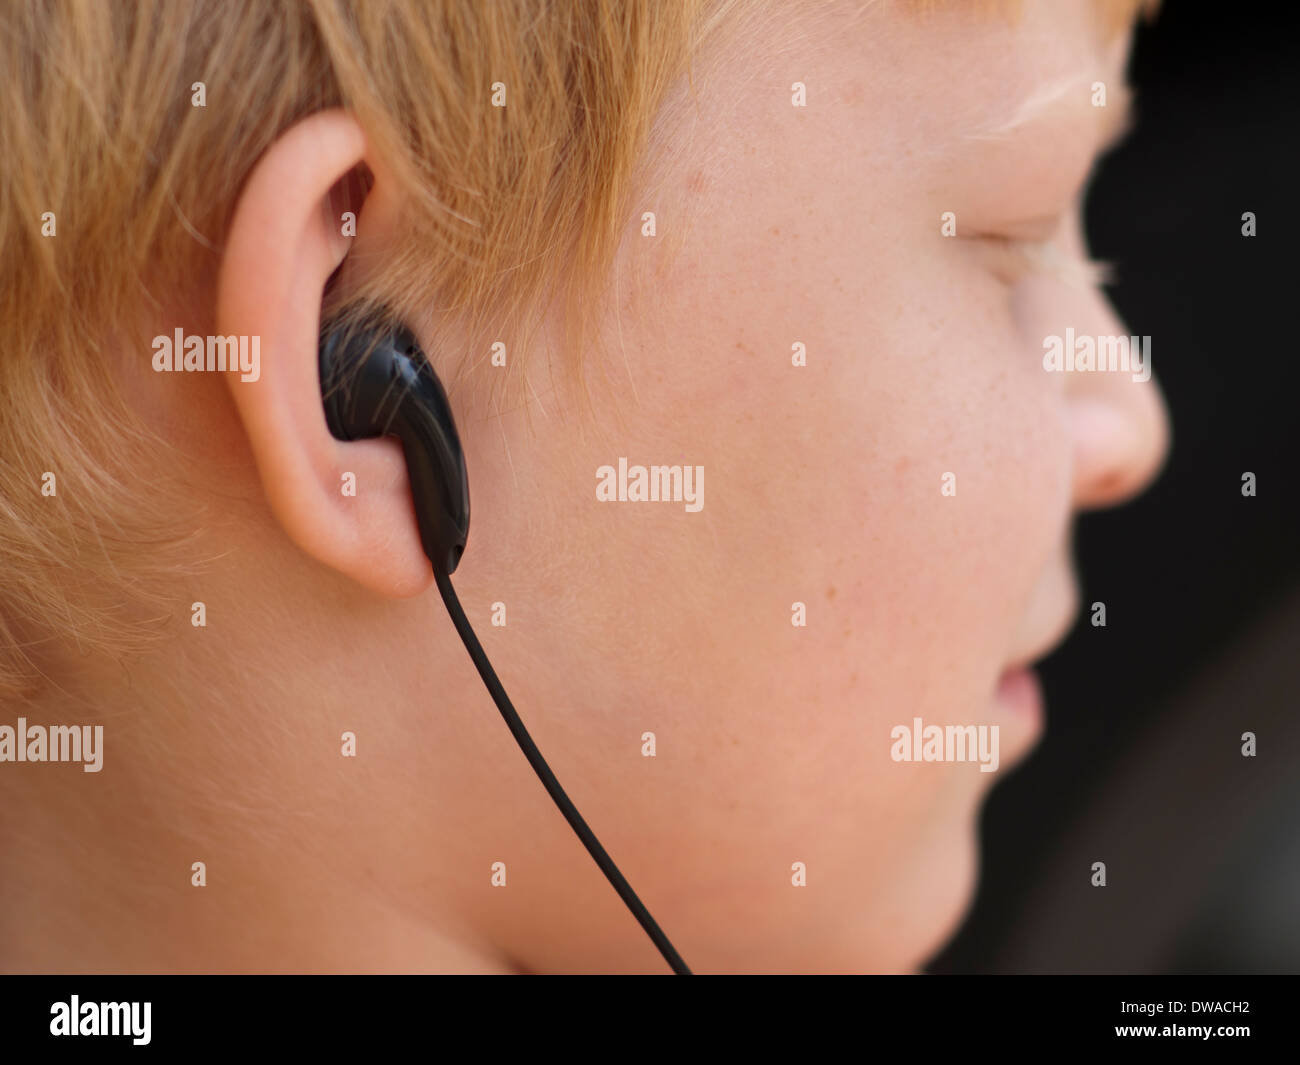 Portrait of a 7-year old boy listening to his MP3-player using in-ear  earphones Stock Photo - Alamy